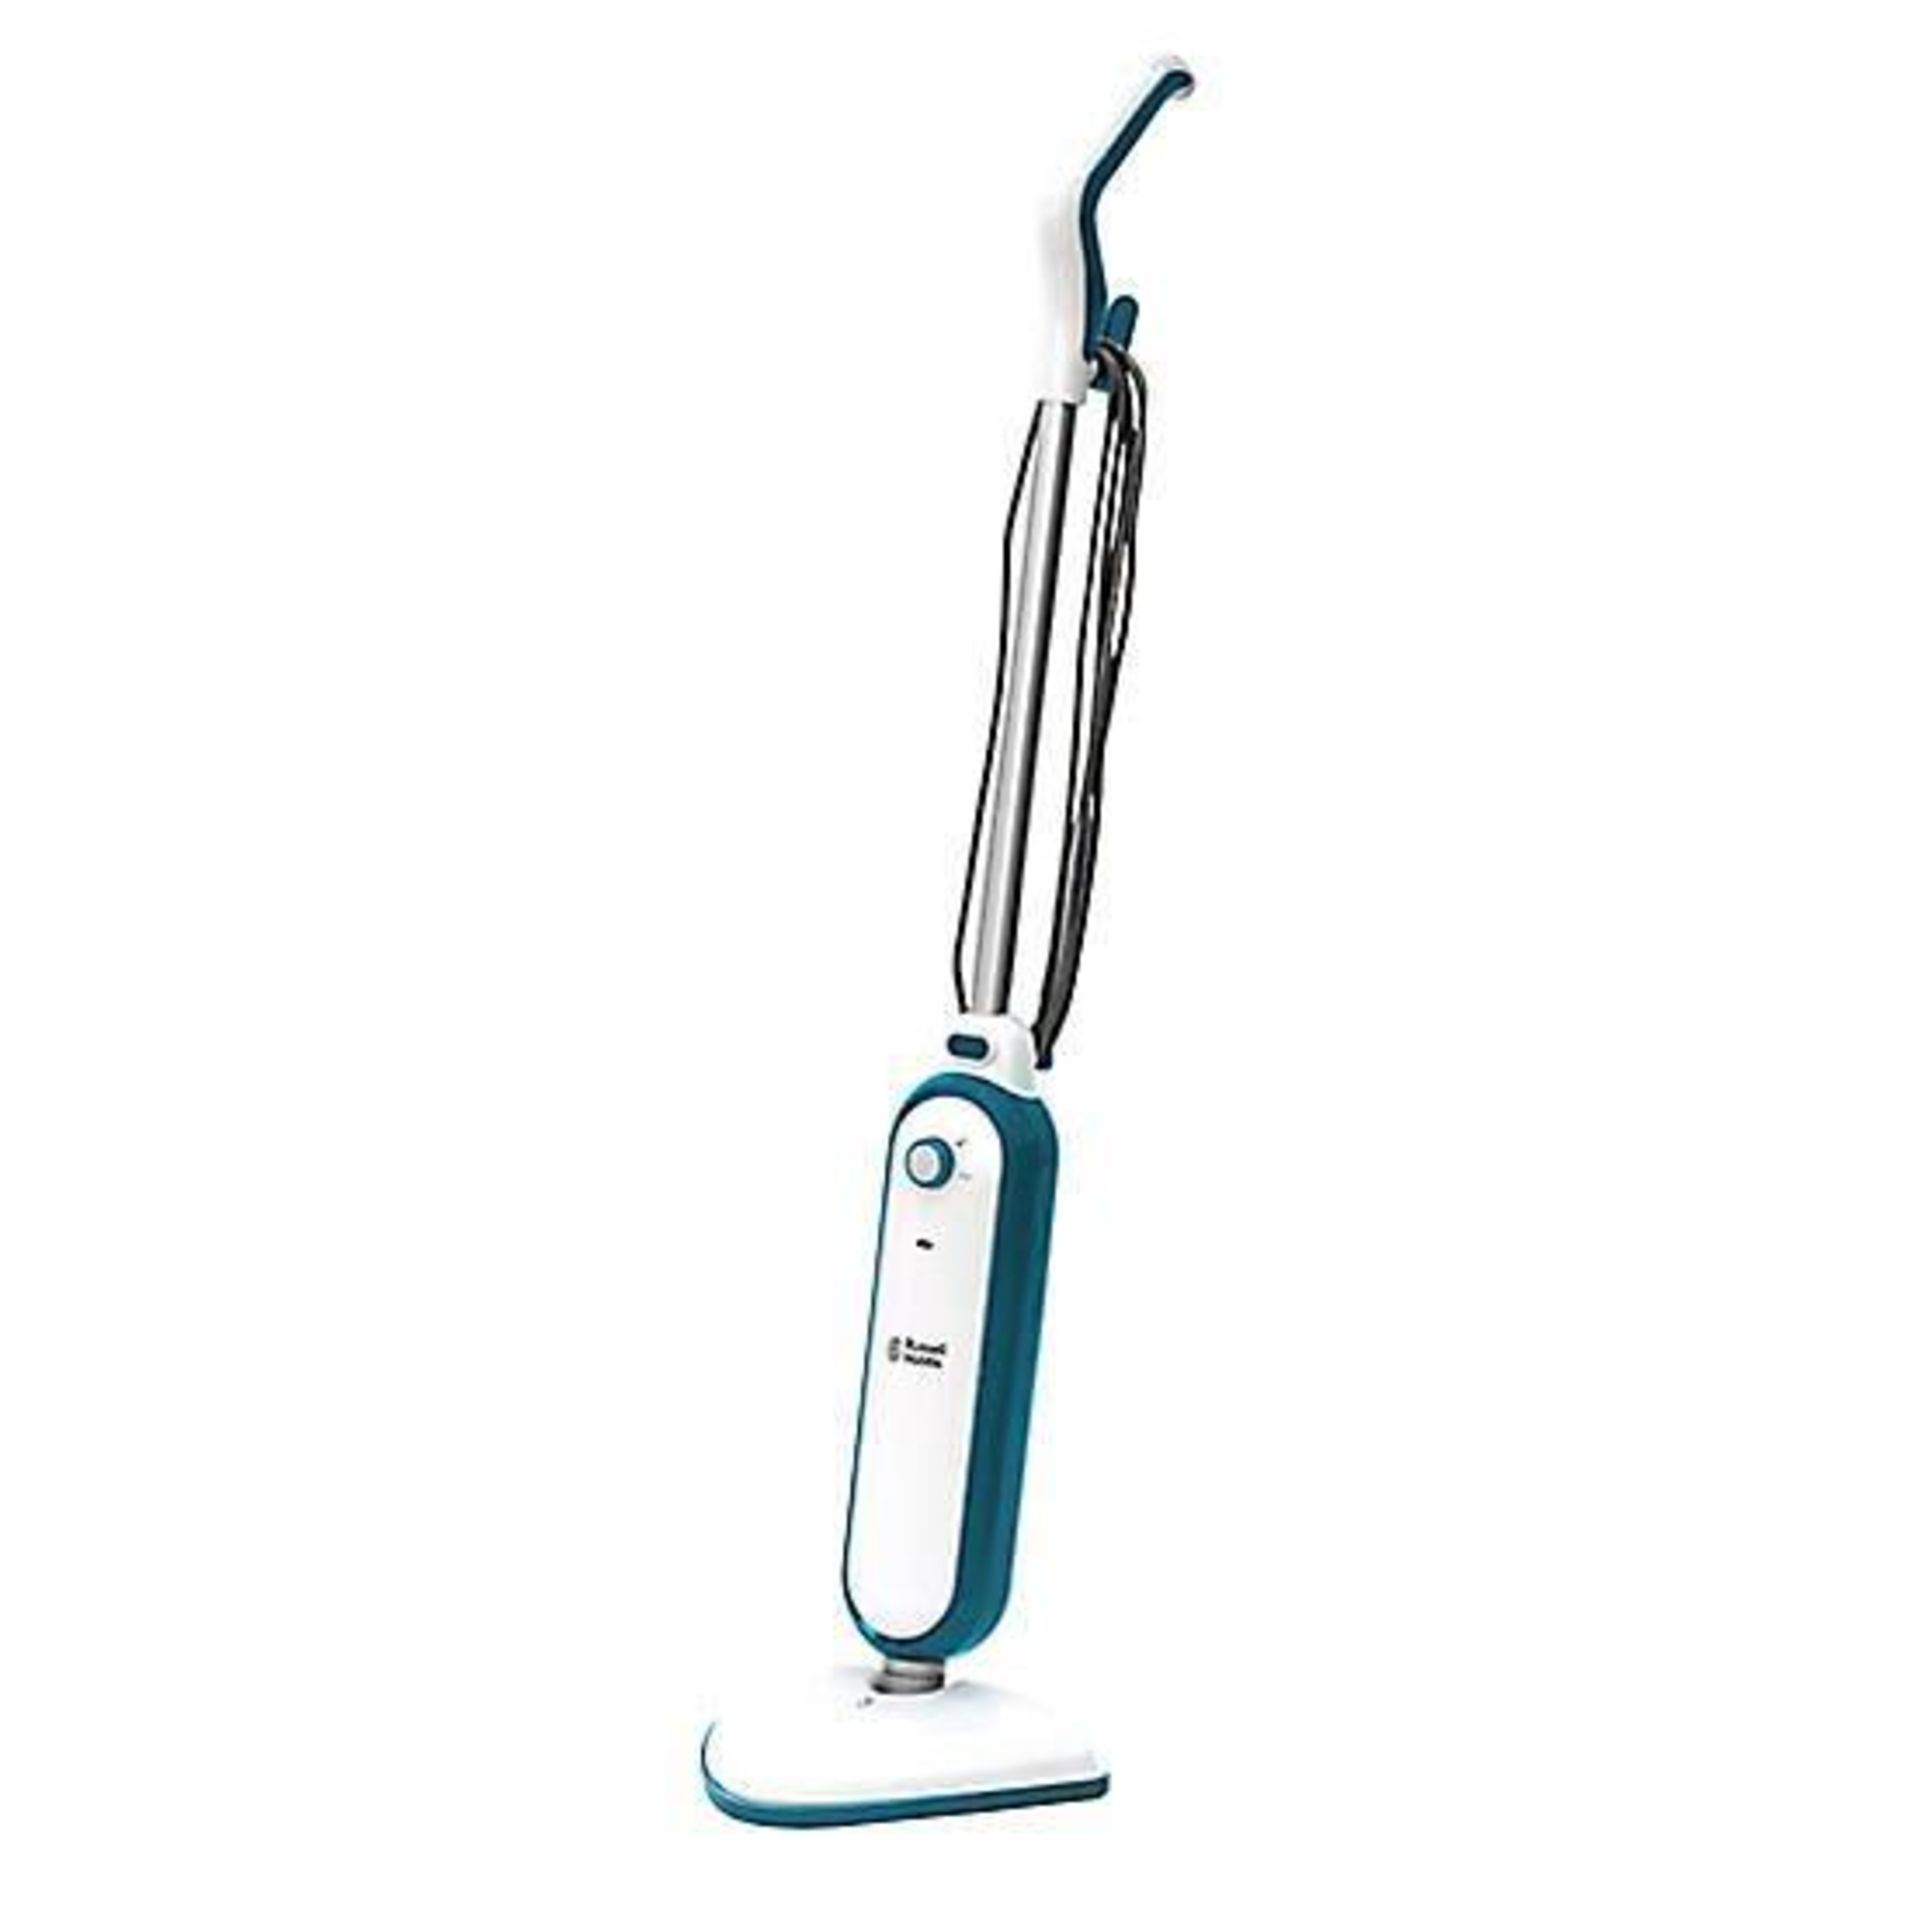 Russell Hobbs Steam and Clean Steam Mop - £44.00 RRP